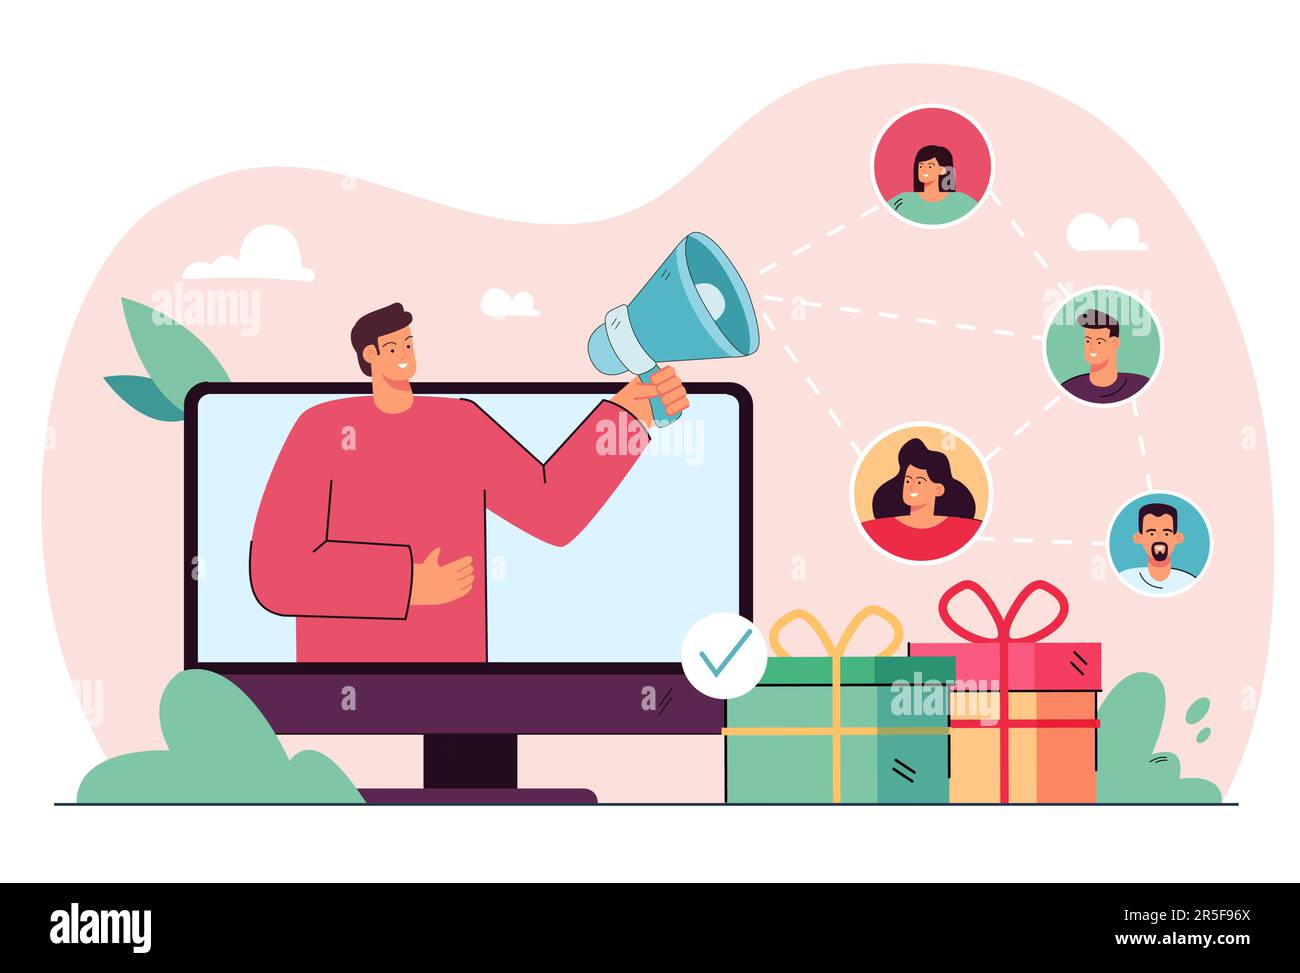 Business person using social media referral strategy online Stock Vector